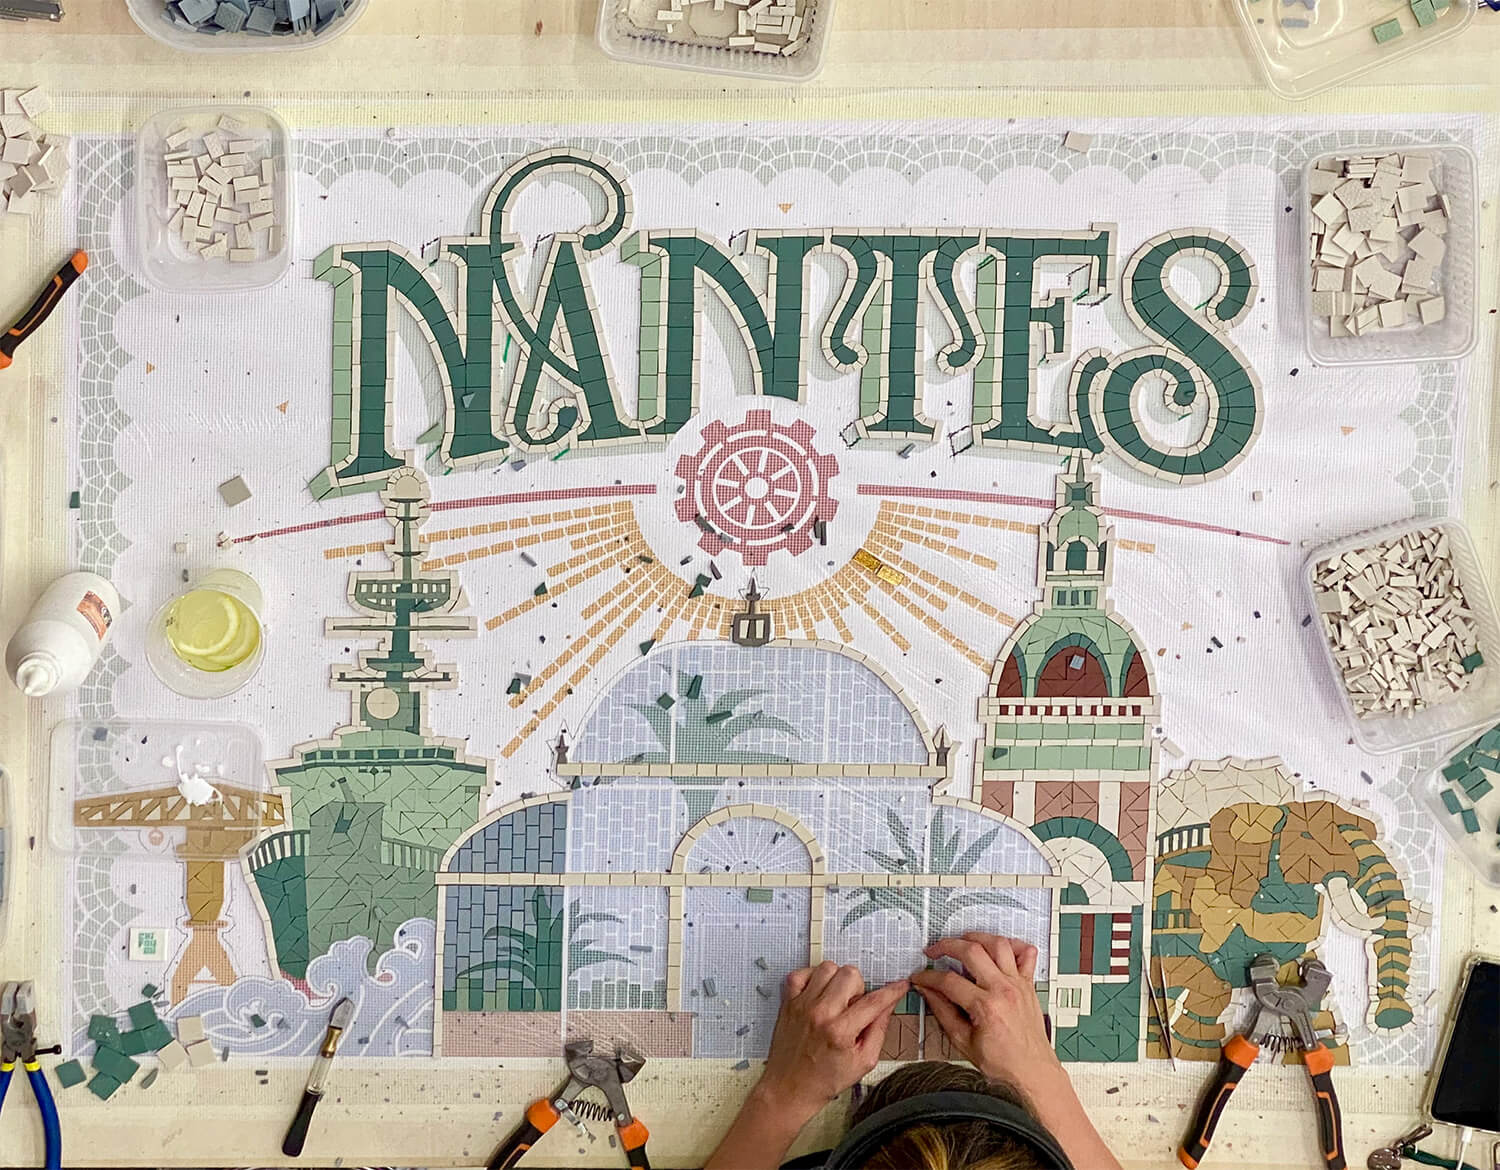 French mosaic artist in Nantes